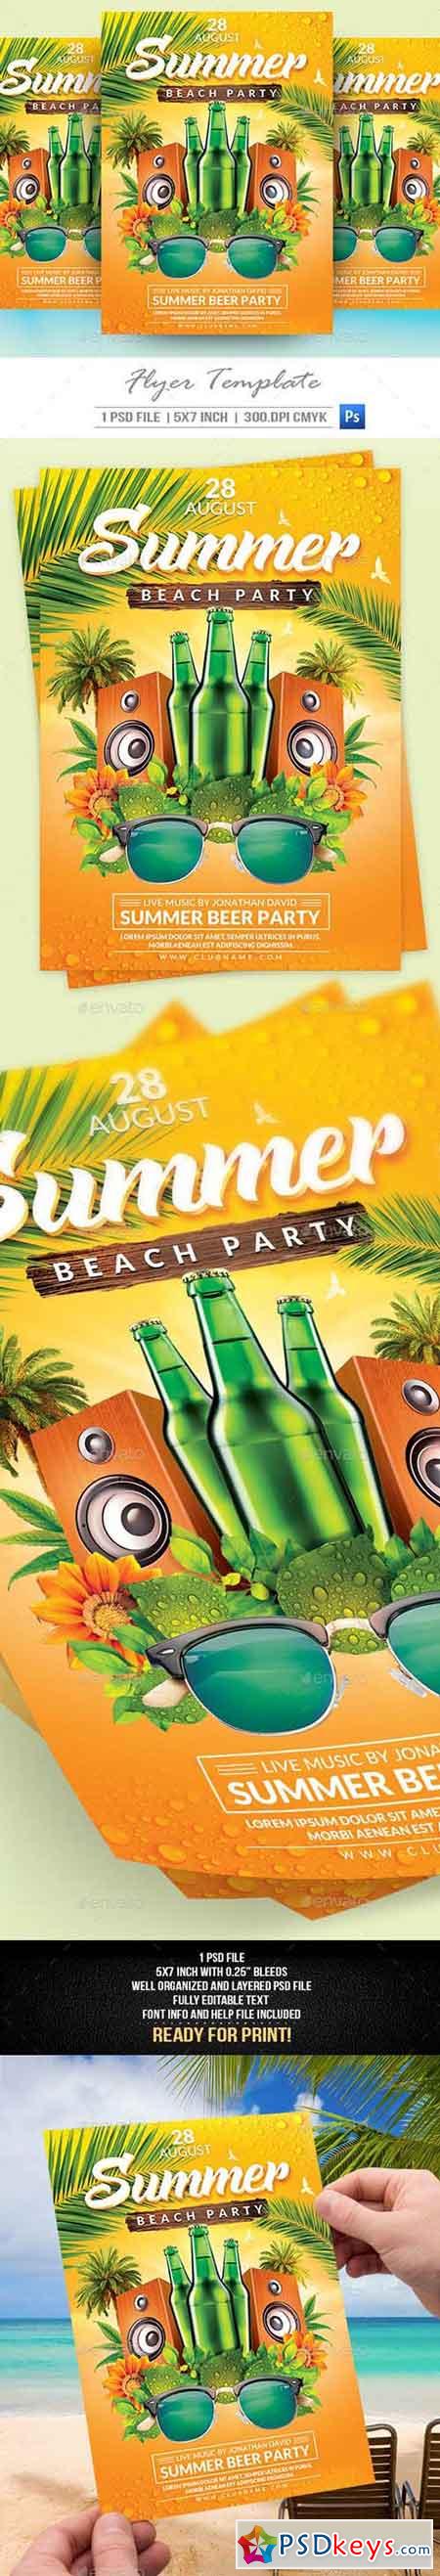 Summer Party Flyer Template V2 20008309